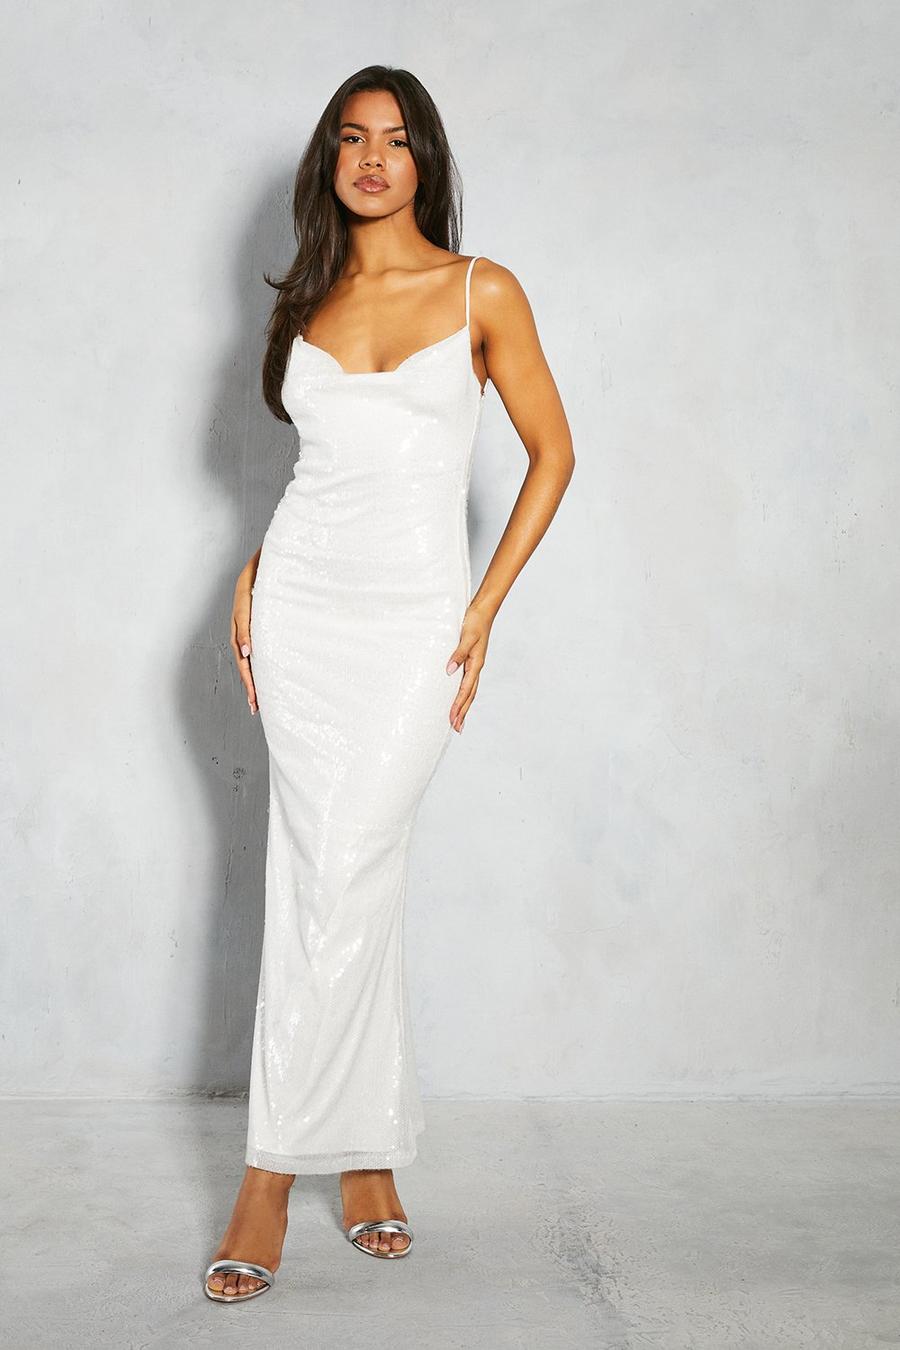 Silver Sequin Cowl Neck Backless Strappy Maxi Dress